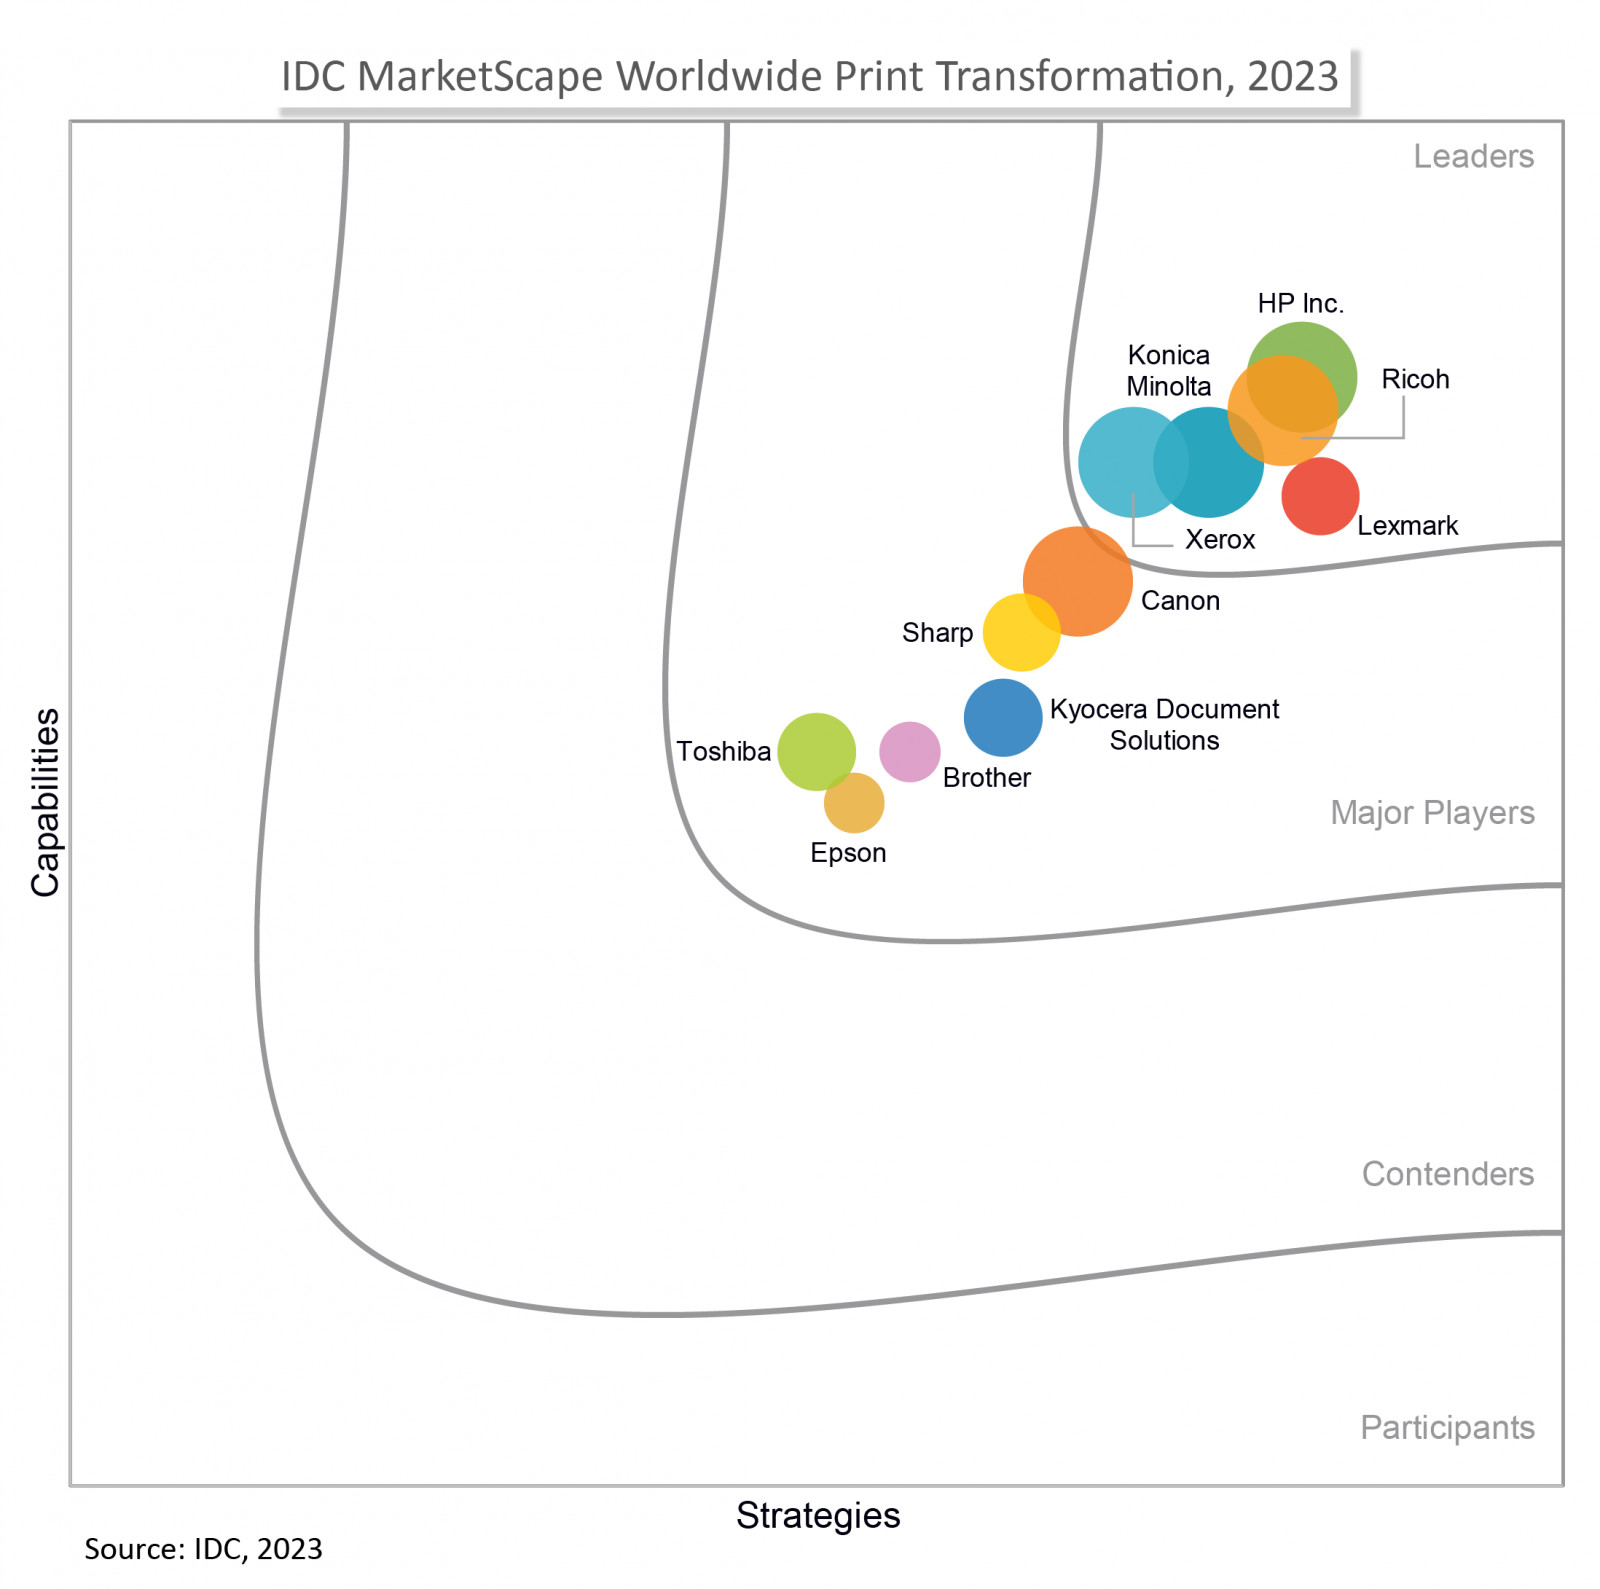 Ricoh positioned as a Leader in 2023 IDC MarketSca...